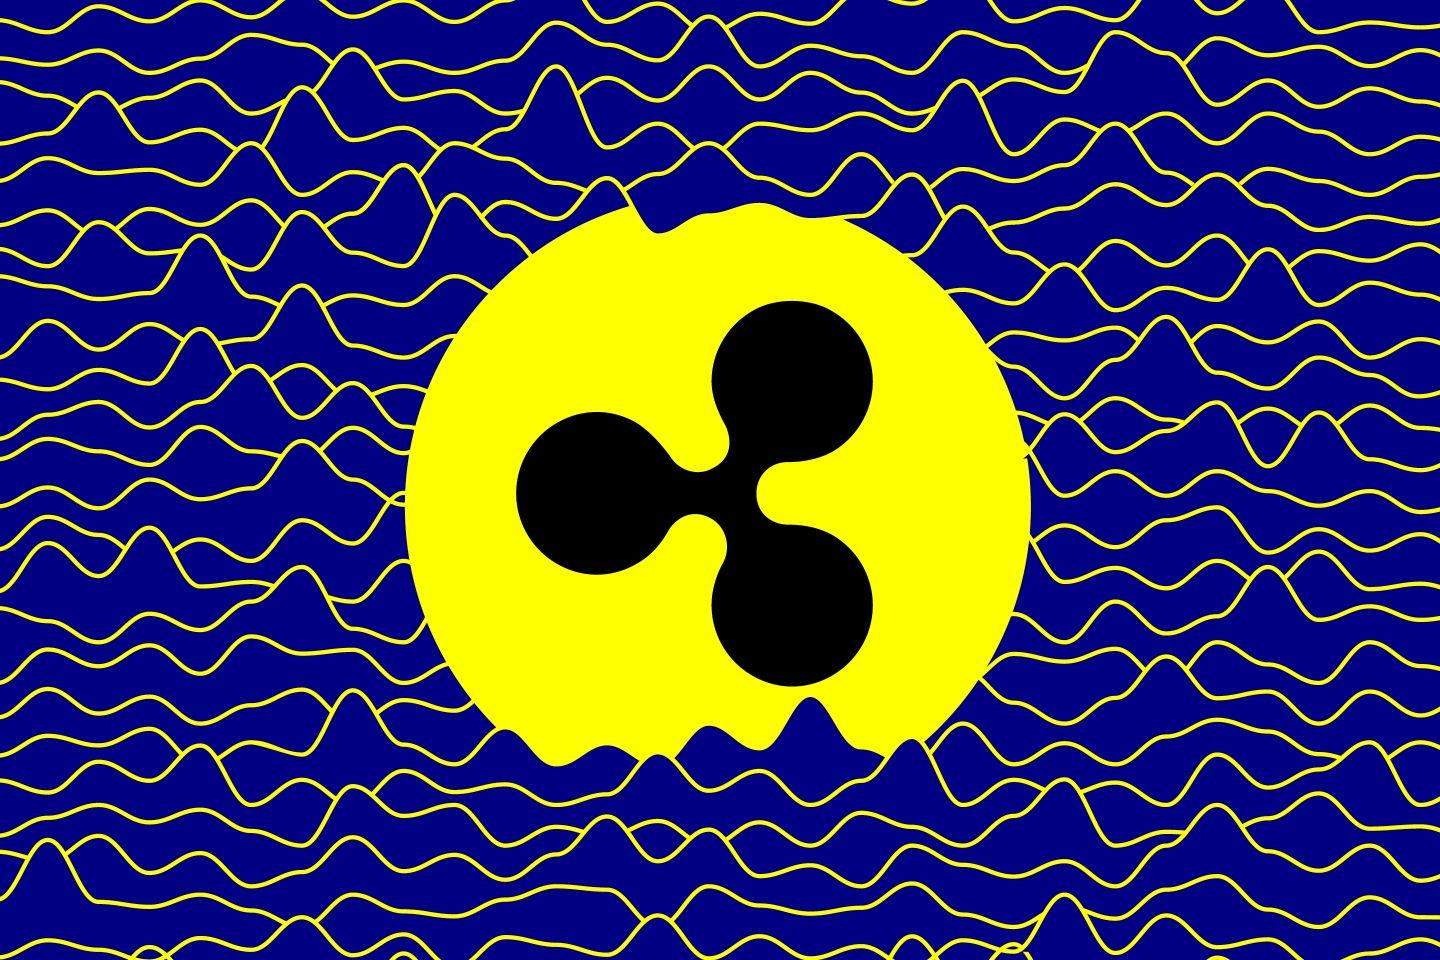 Illustration showing the symbol for Ripple